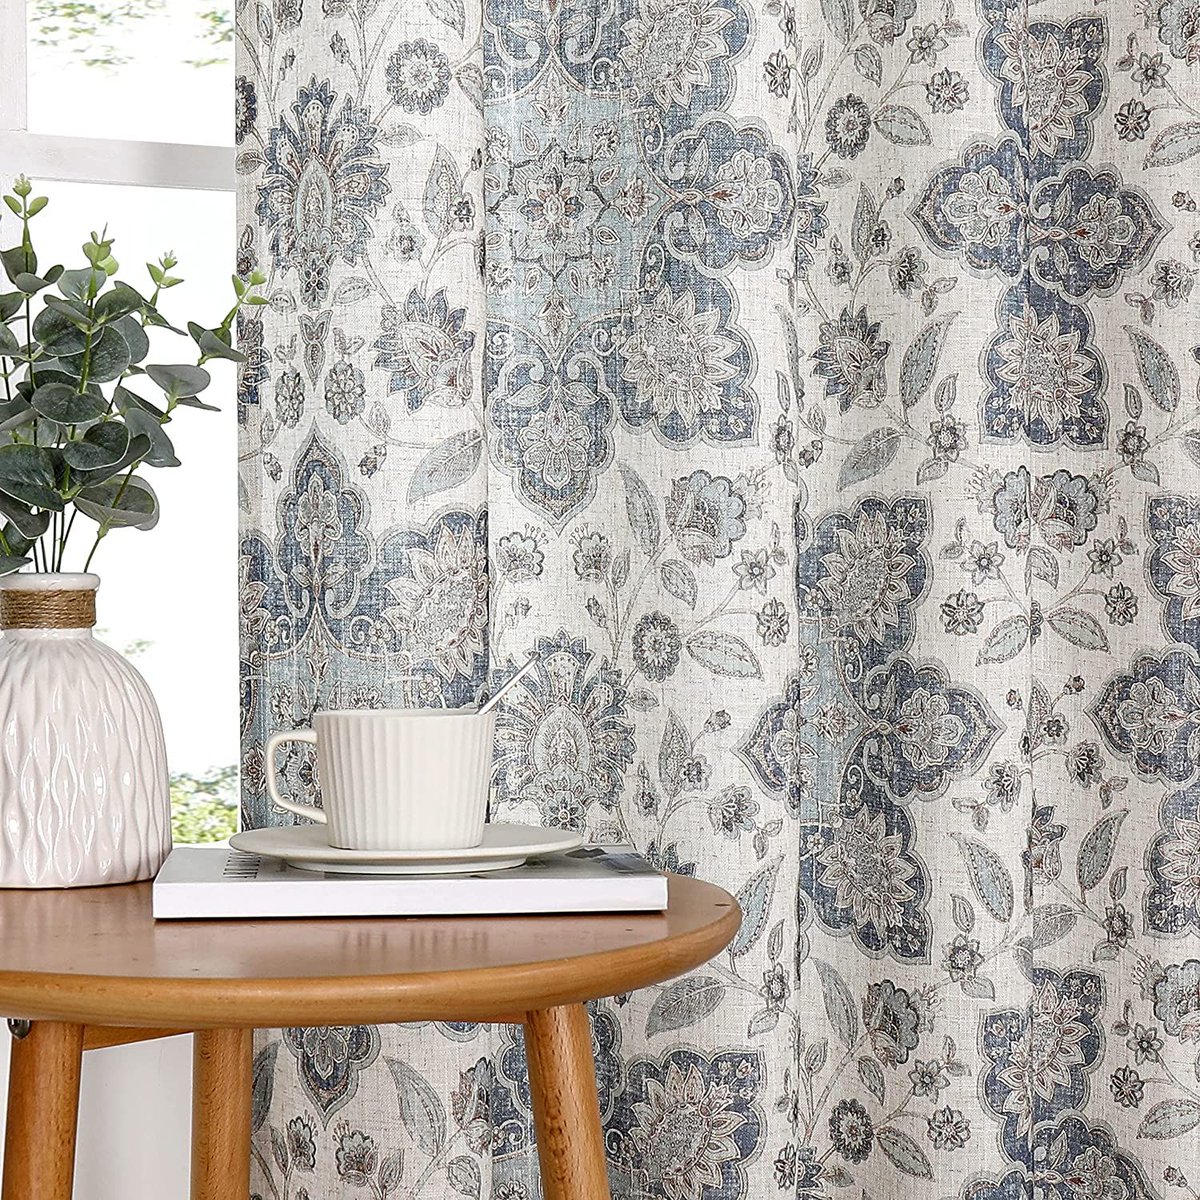 Damask artwork, luxury looking for your house,whole sale,whatsapp+86 13758107156 #homedecore #home #homefashion #fabric #windowcurtain #windowtreatment